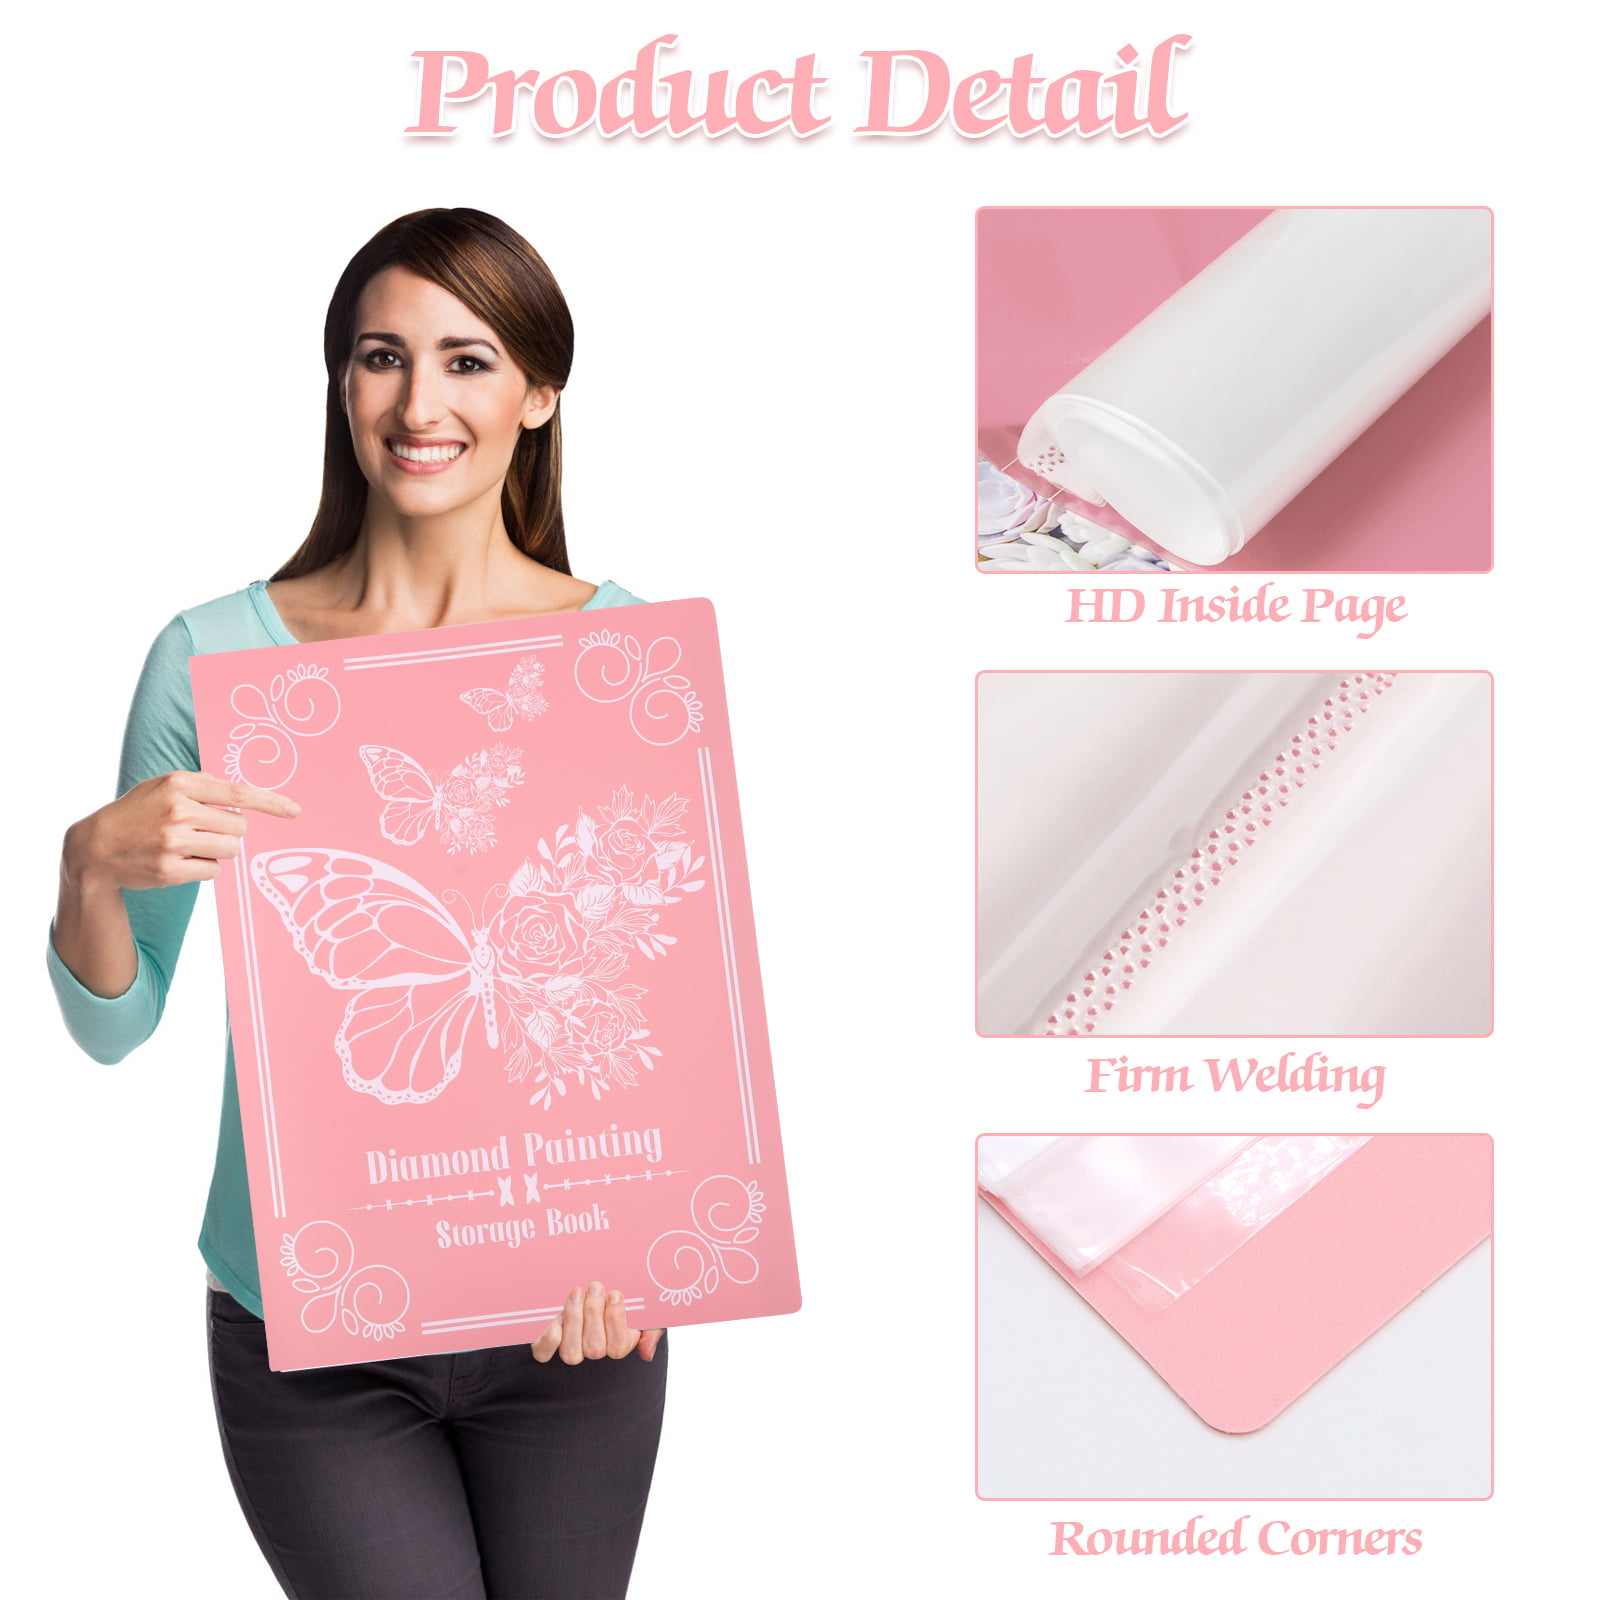 A2 Large Size Diamond Painting Storage Folder for Finished Product, 60  Pages in Pink, White and Black 